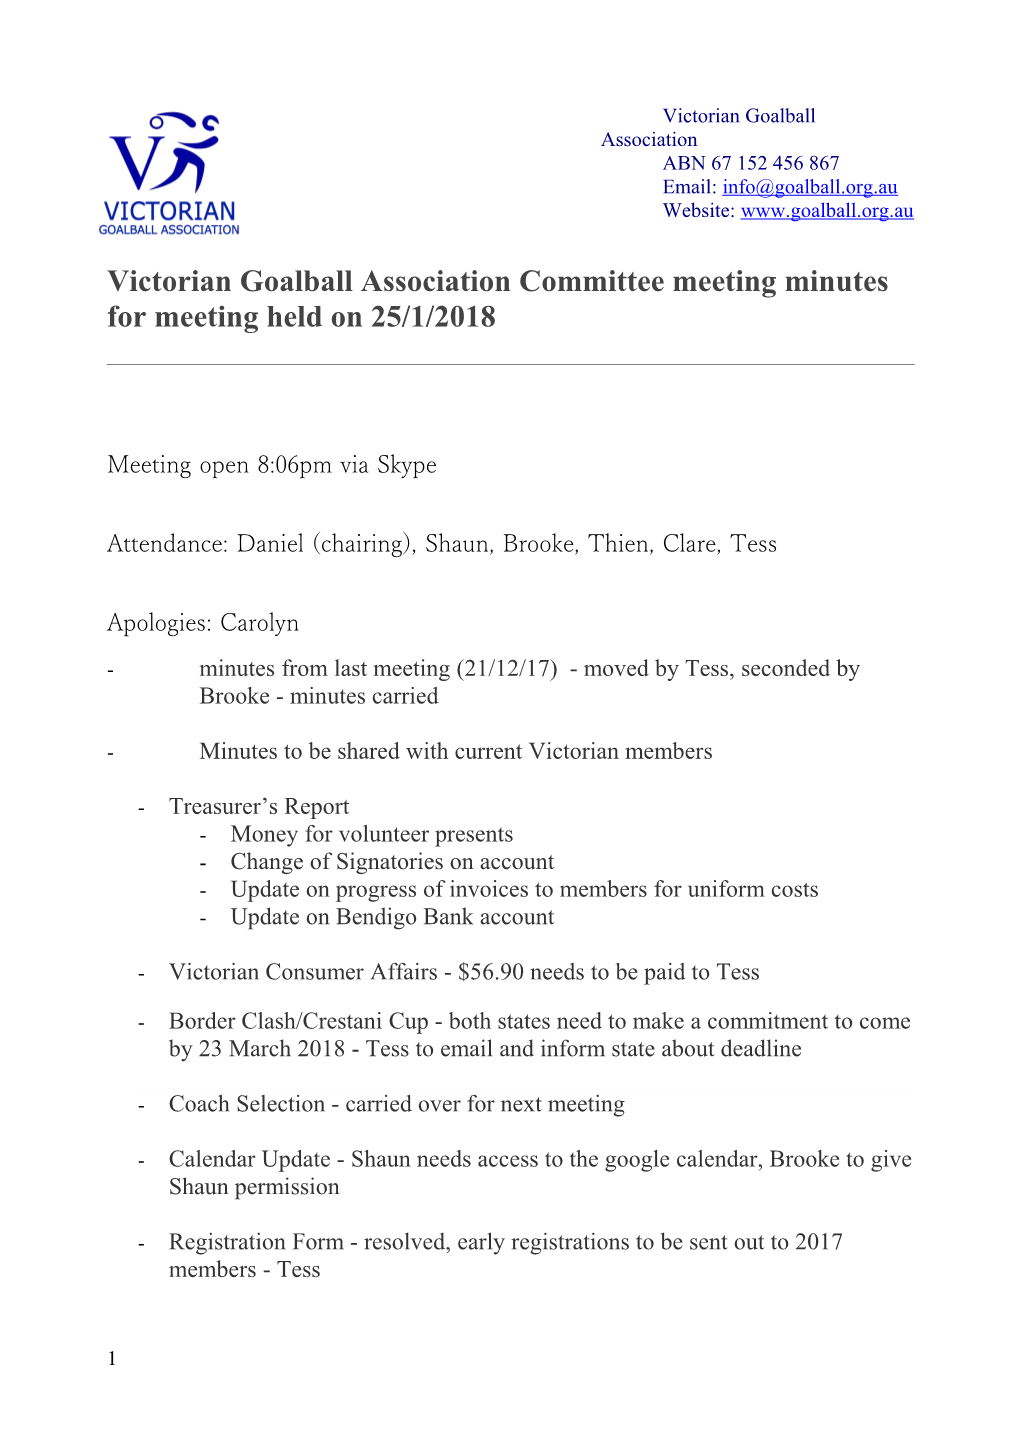 Victorian Goalball Association Committee Meeting Minutes for Meeting Held on 25/1/2018